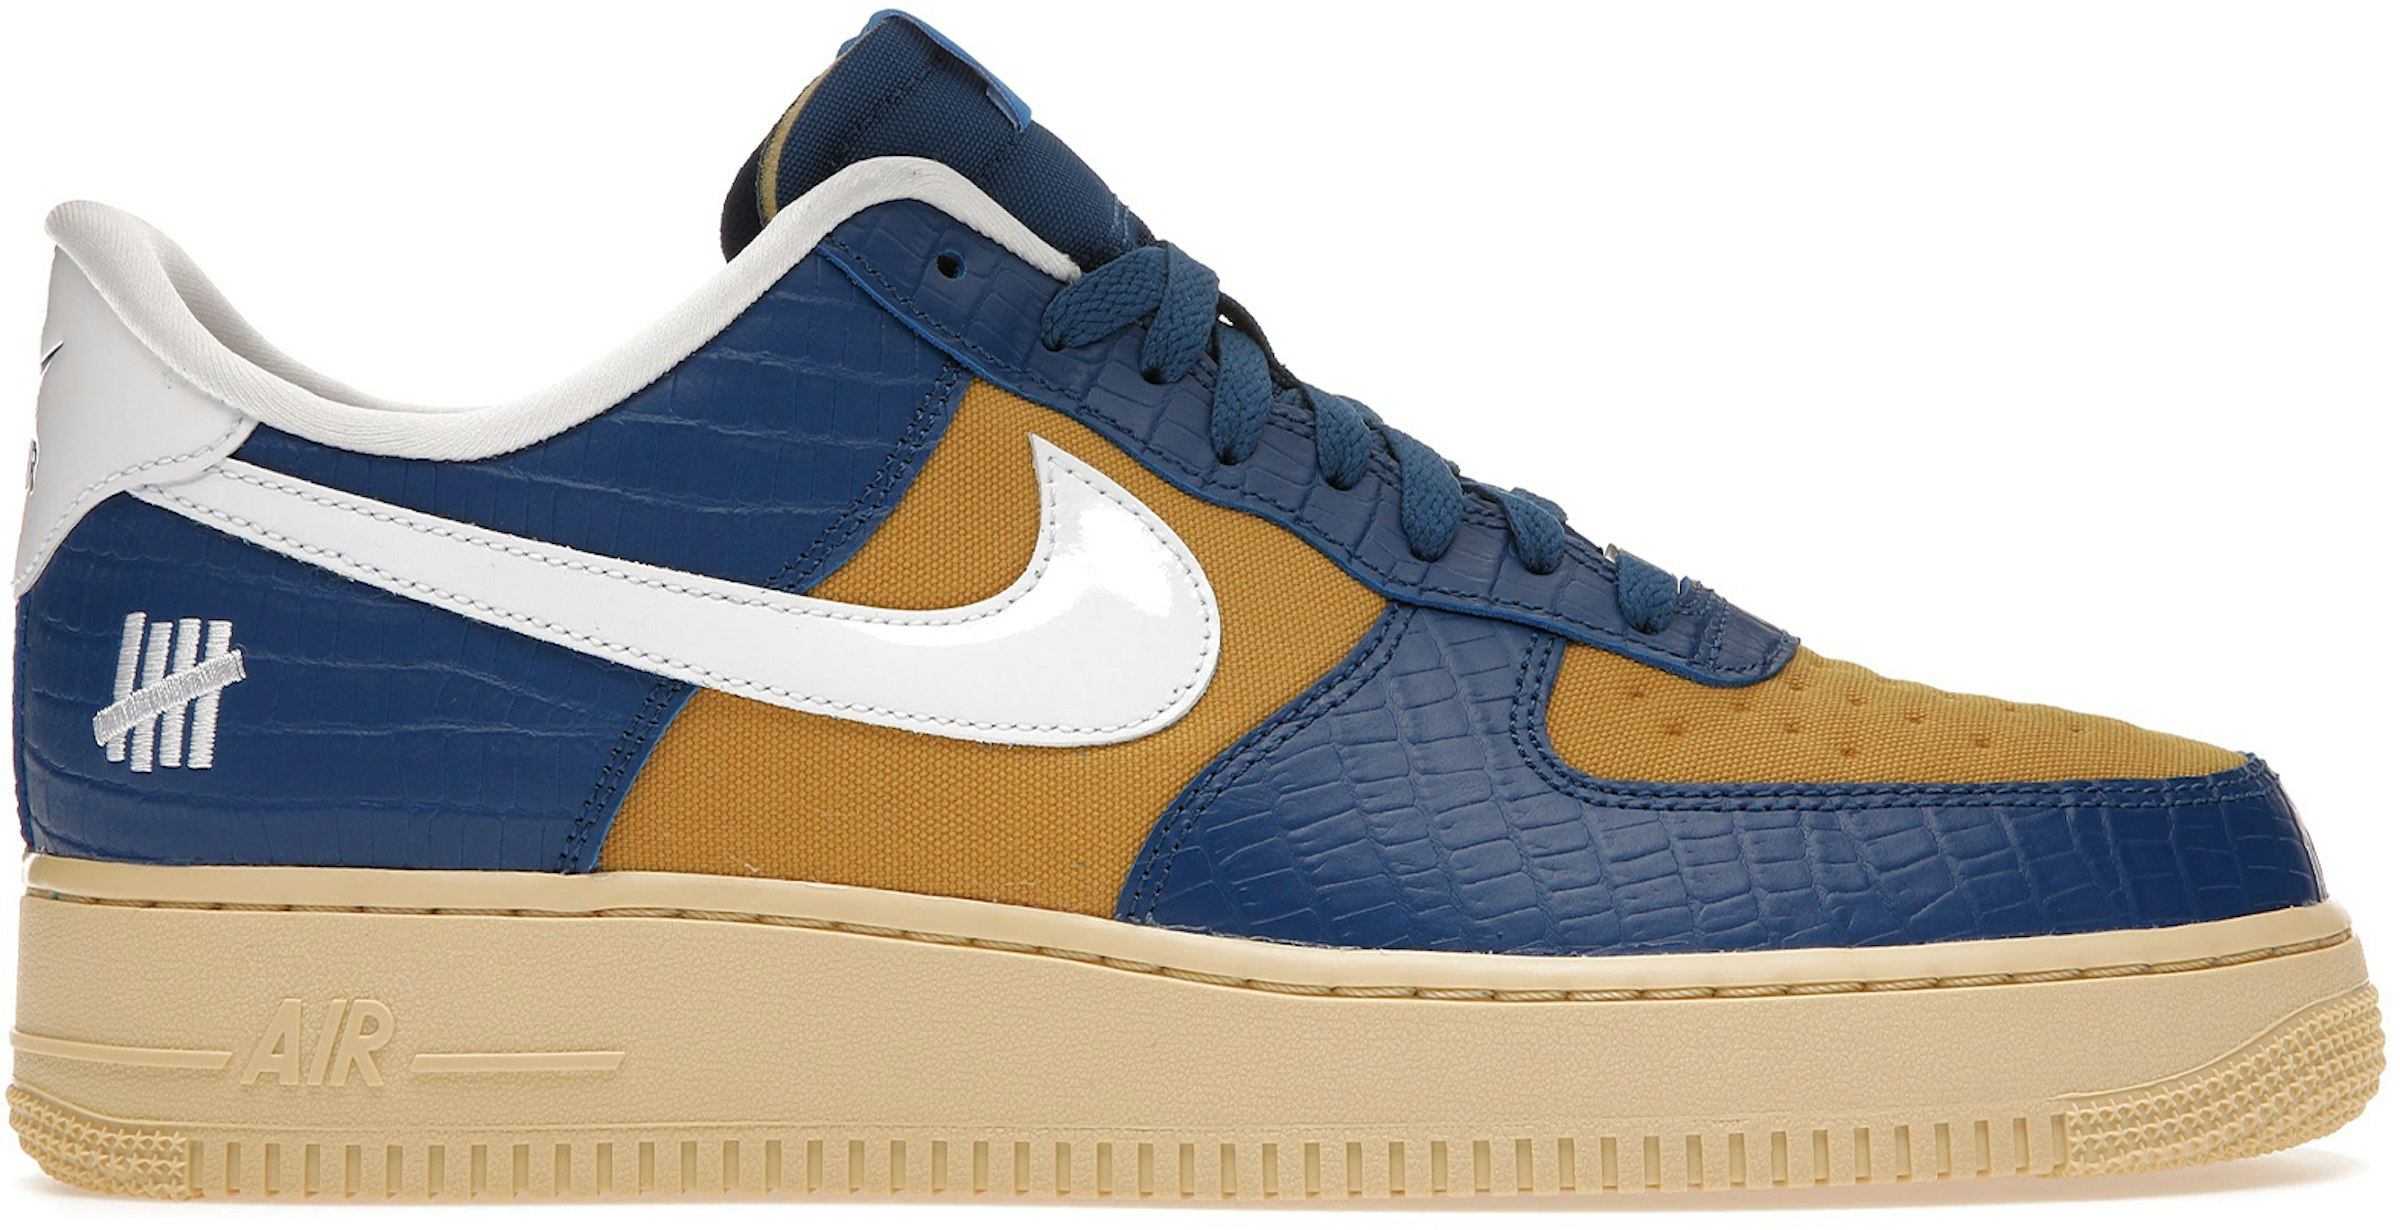 Ewell persona Inhibir Nike Air Force 1 Low SP Undefeated 5 On It Blue Yellow Croc Men's -  DM8462-400 - US